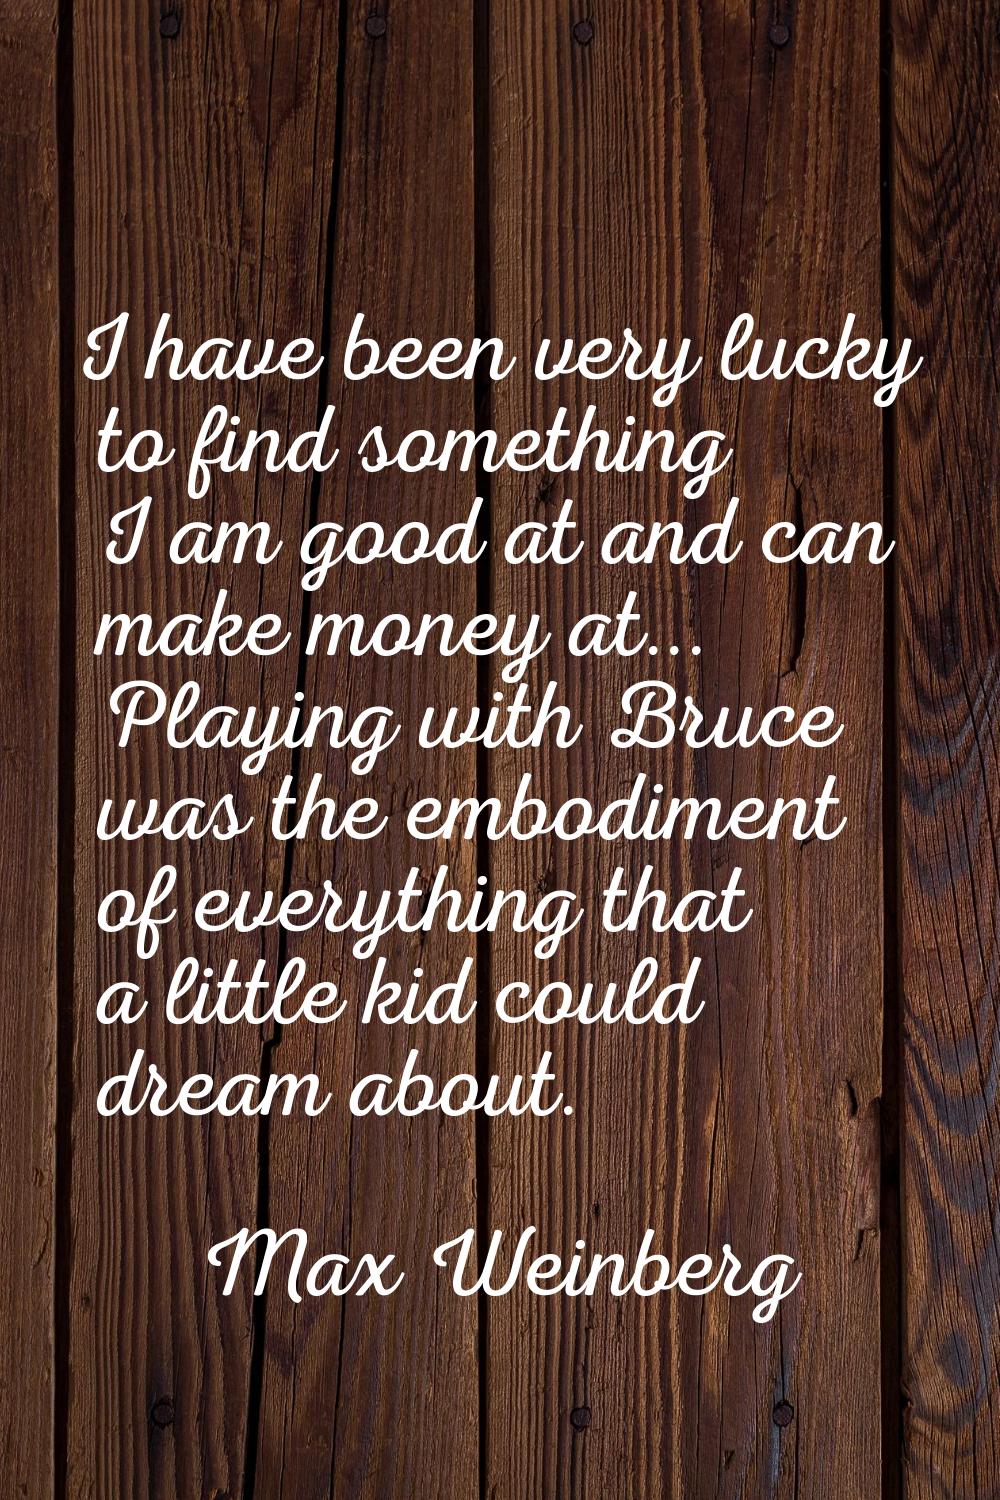 I have been very lucky to find something I am good at and can make money at... Playing with Bruce w